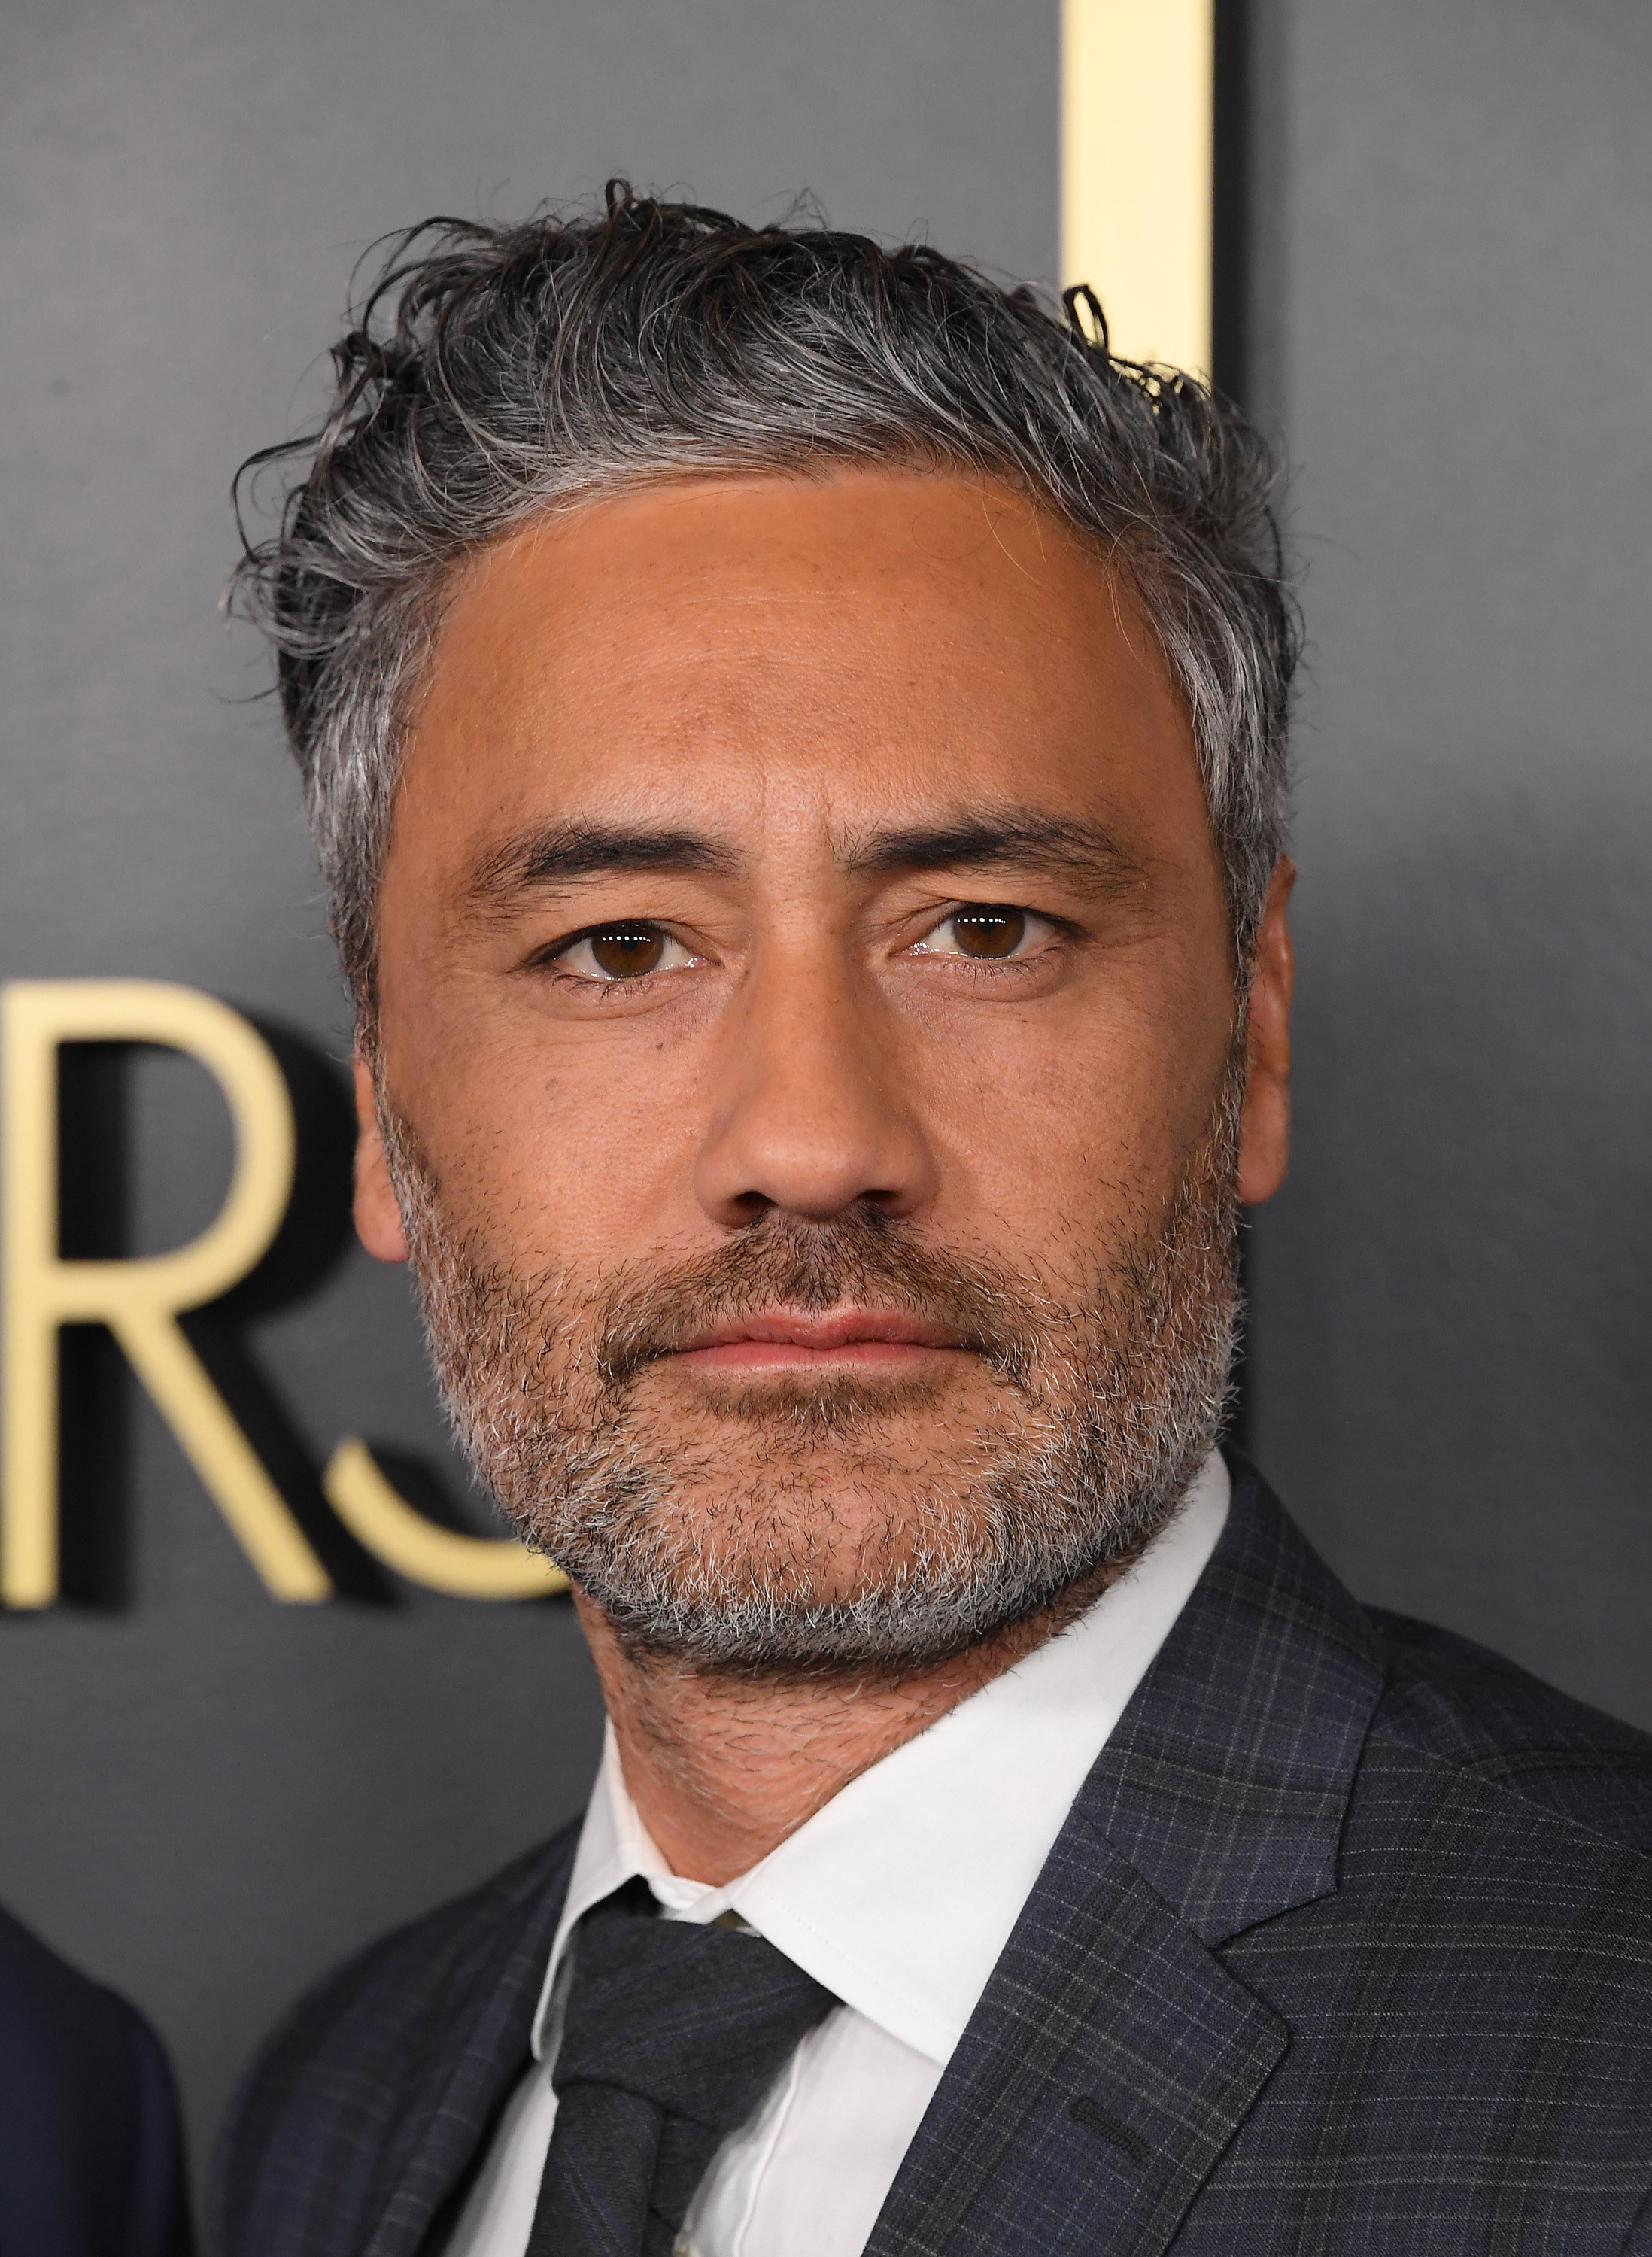 Taika Waititi looks directly at the camera in a suit at an award show